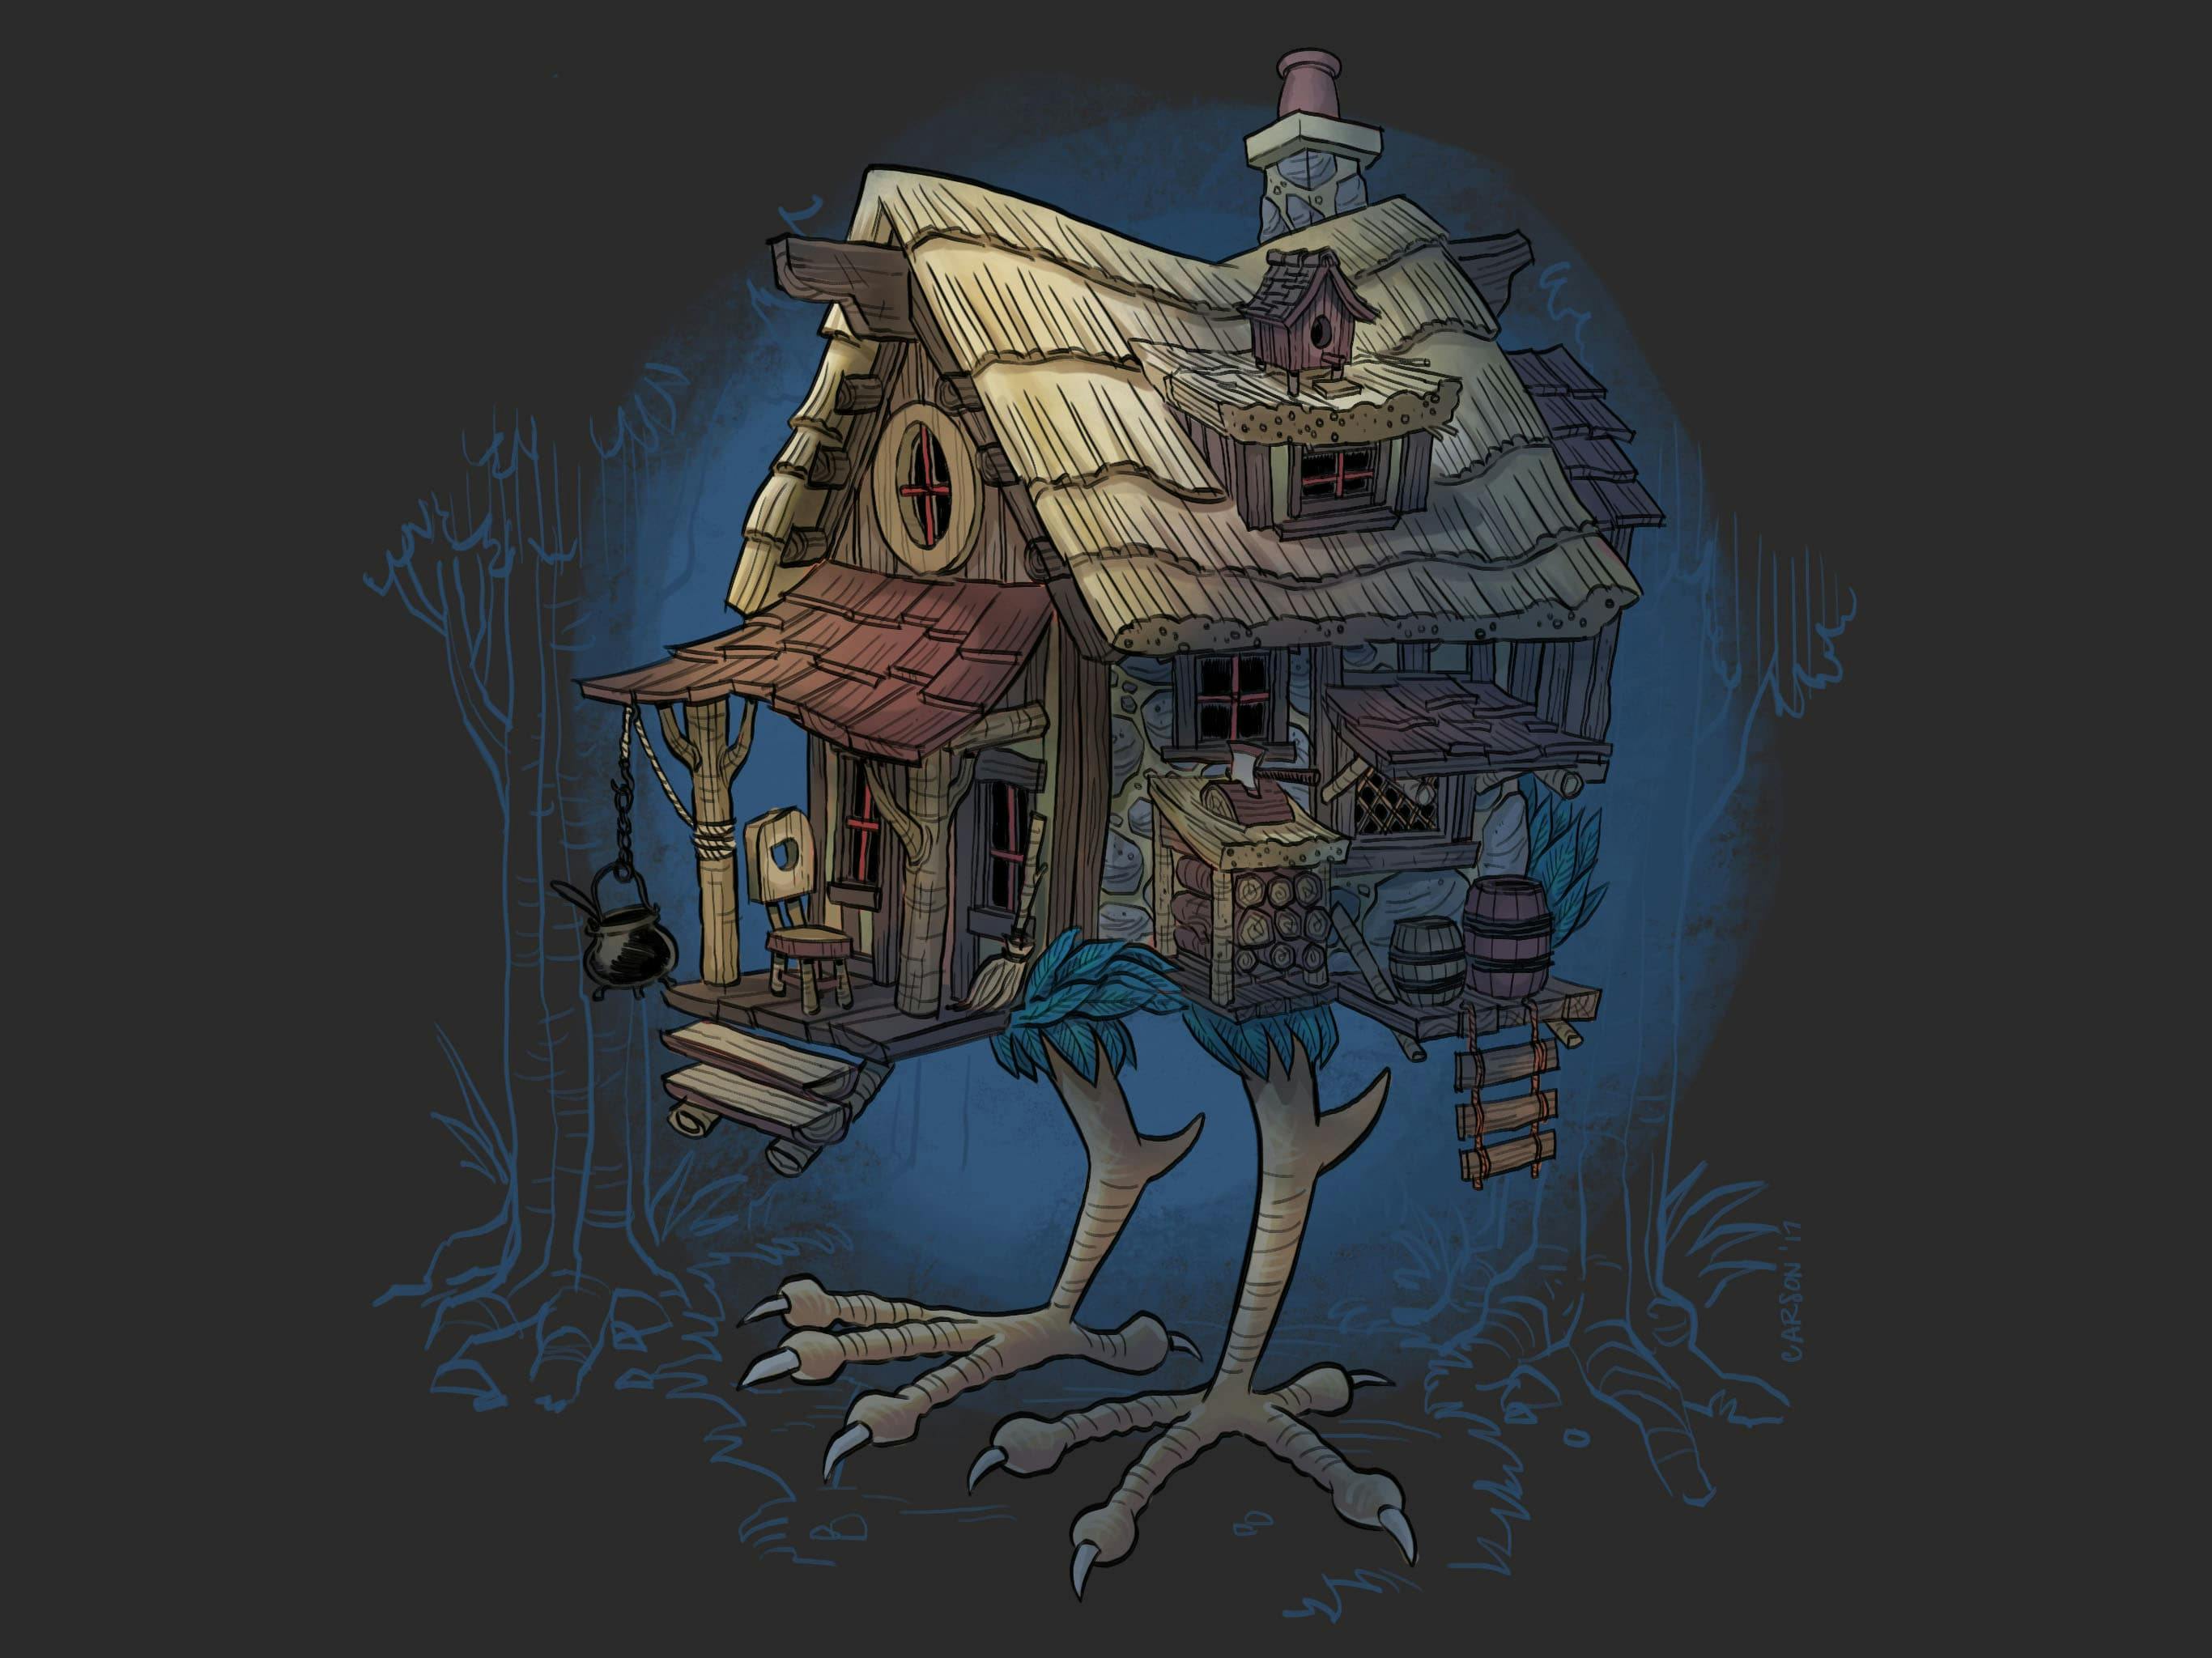 A cottage with chicken legs